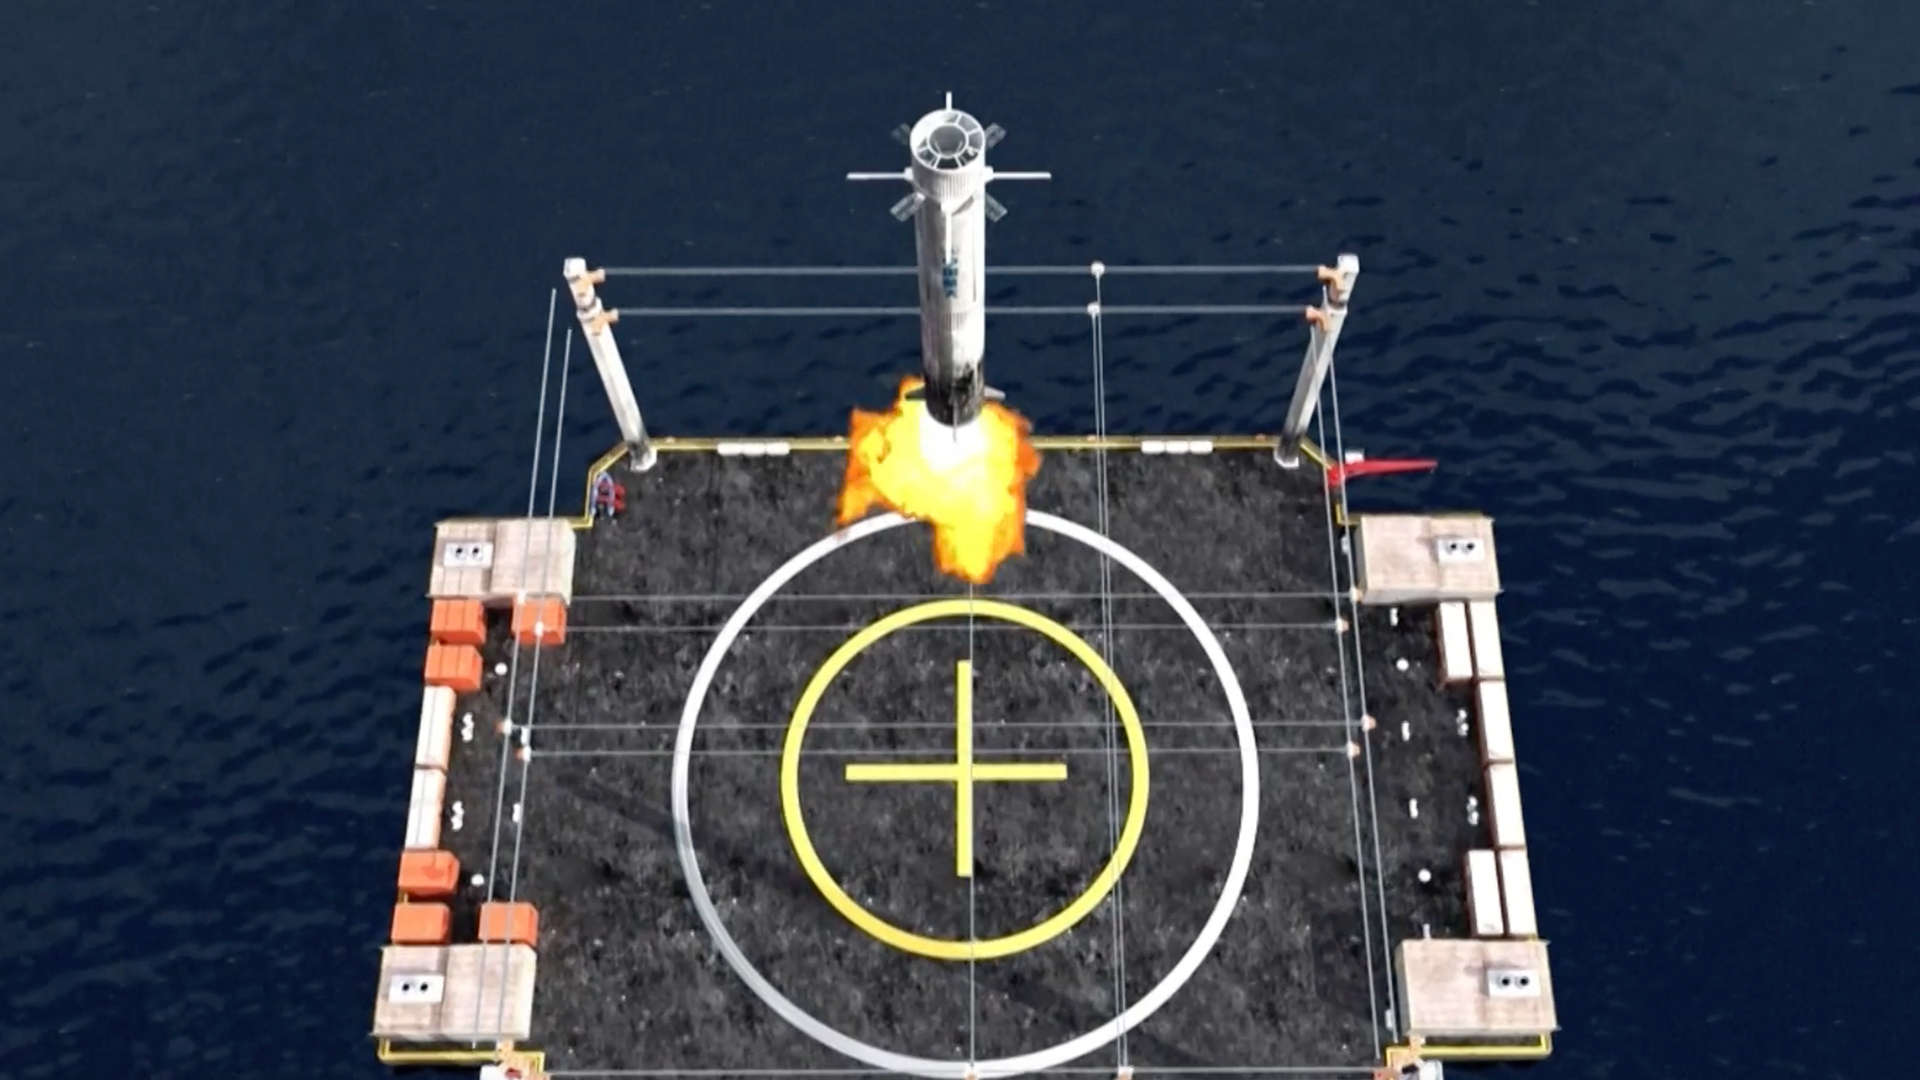 Still from an animation showing a white rocket landing on a dark ship at sea